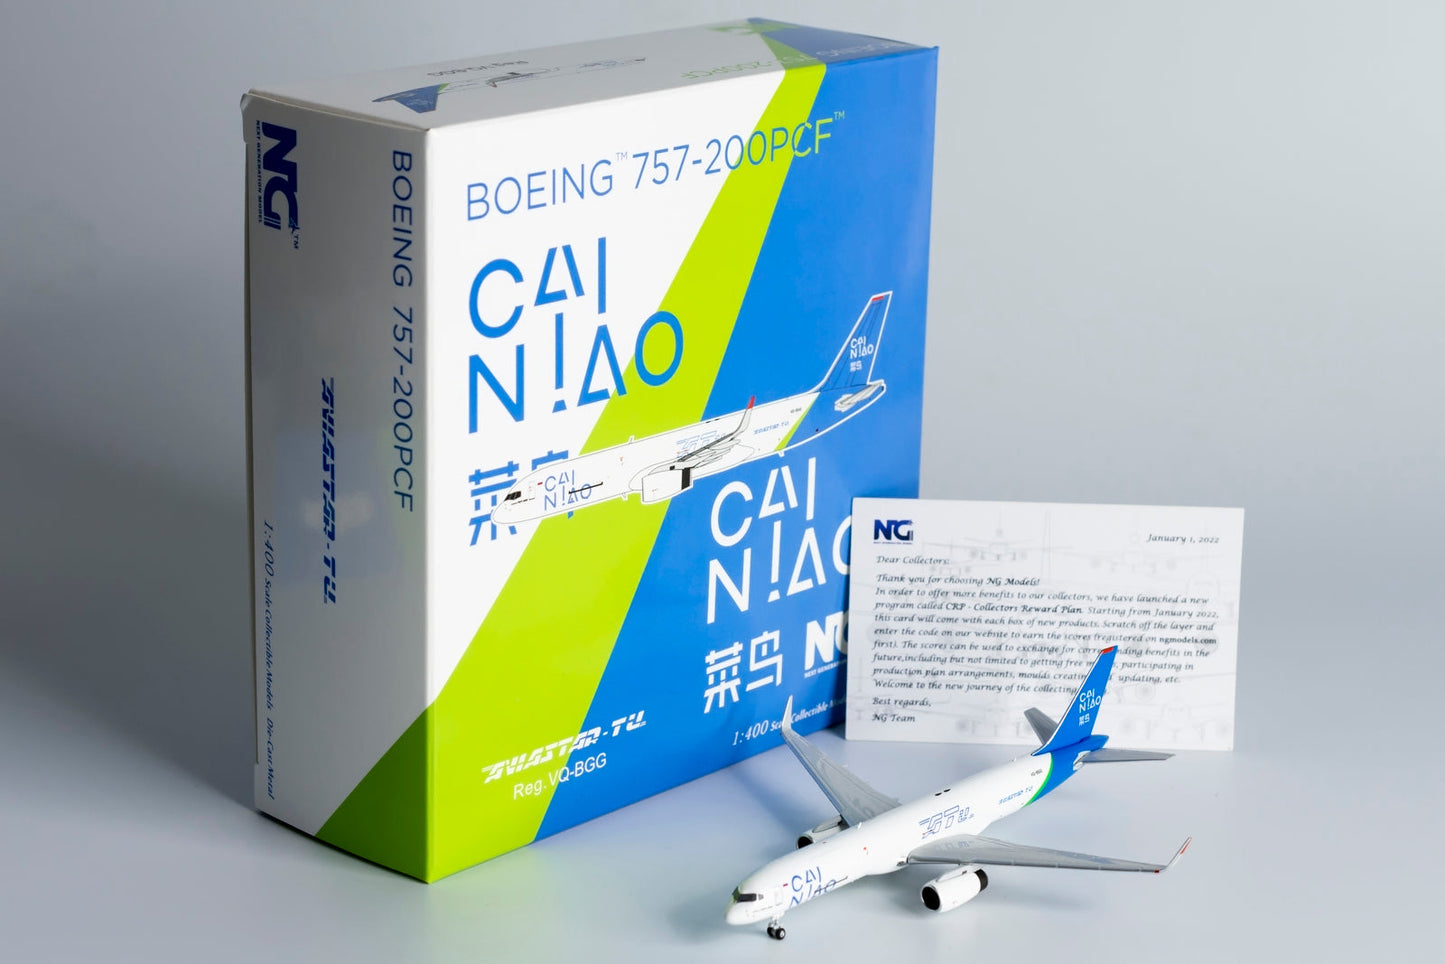 * 1/400 Aviastar-TU Airlines B 757-200PCF "Cainiao Network Livery" NG Models 53189